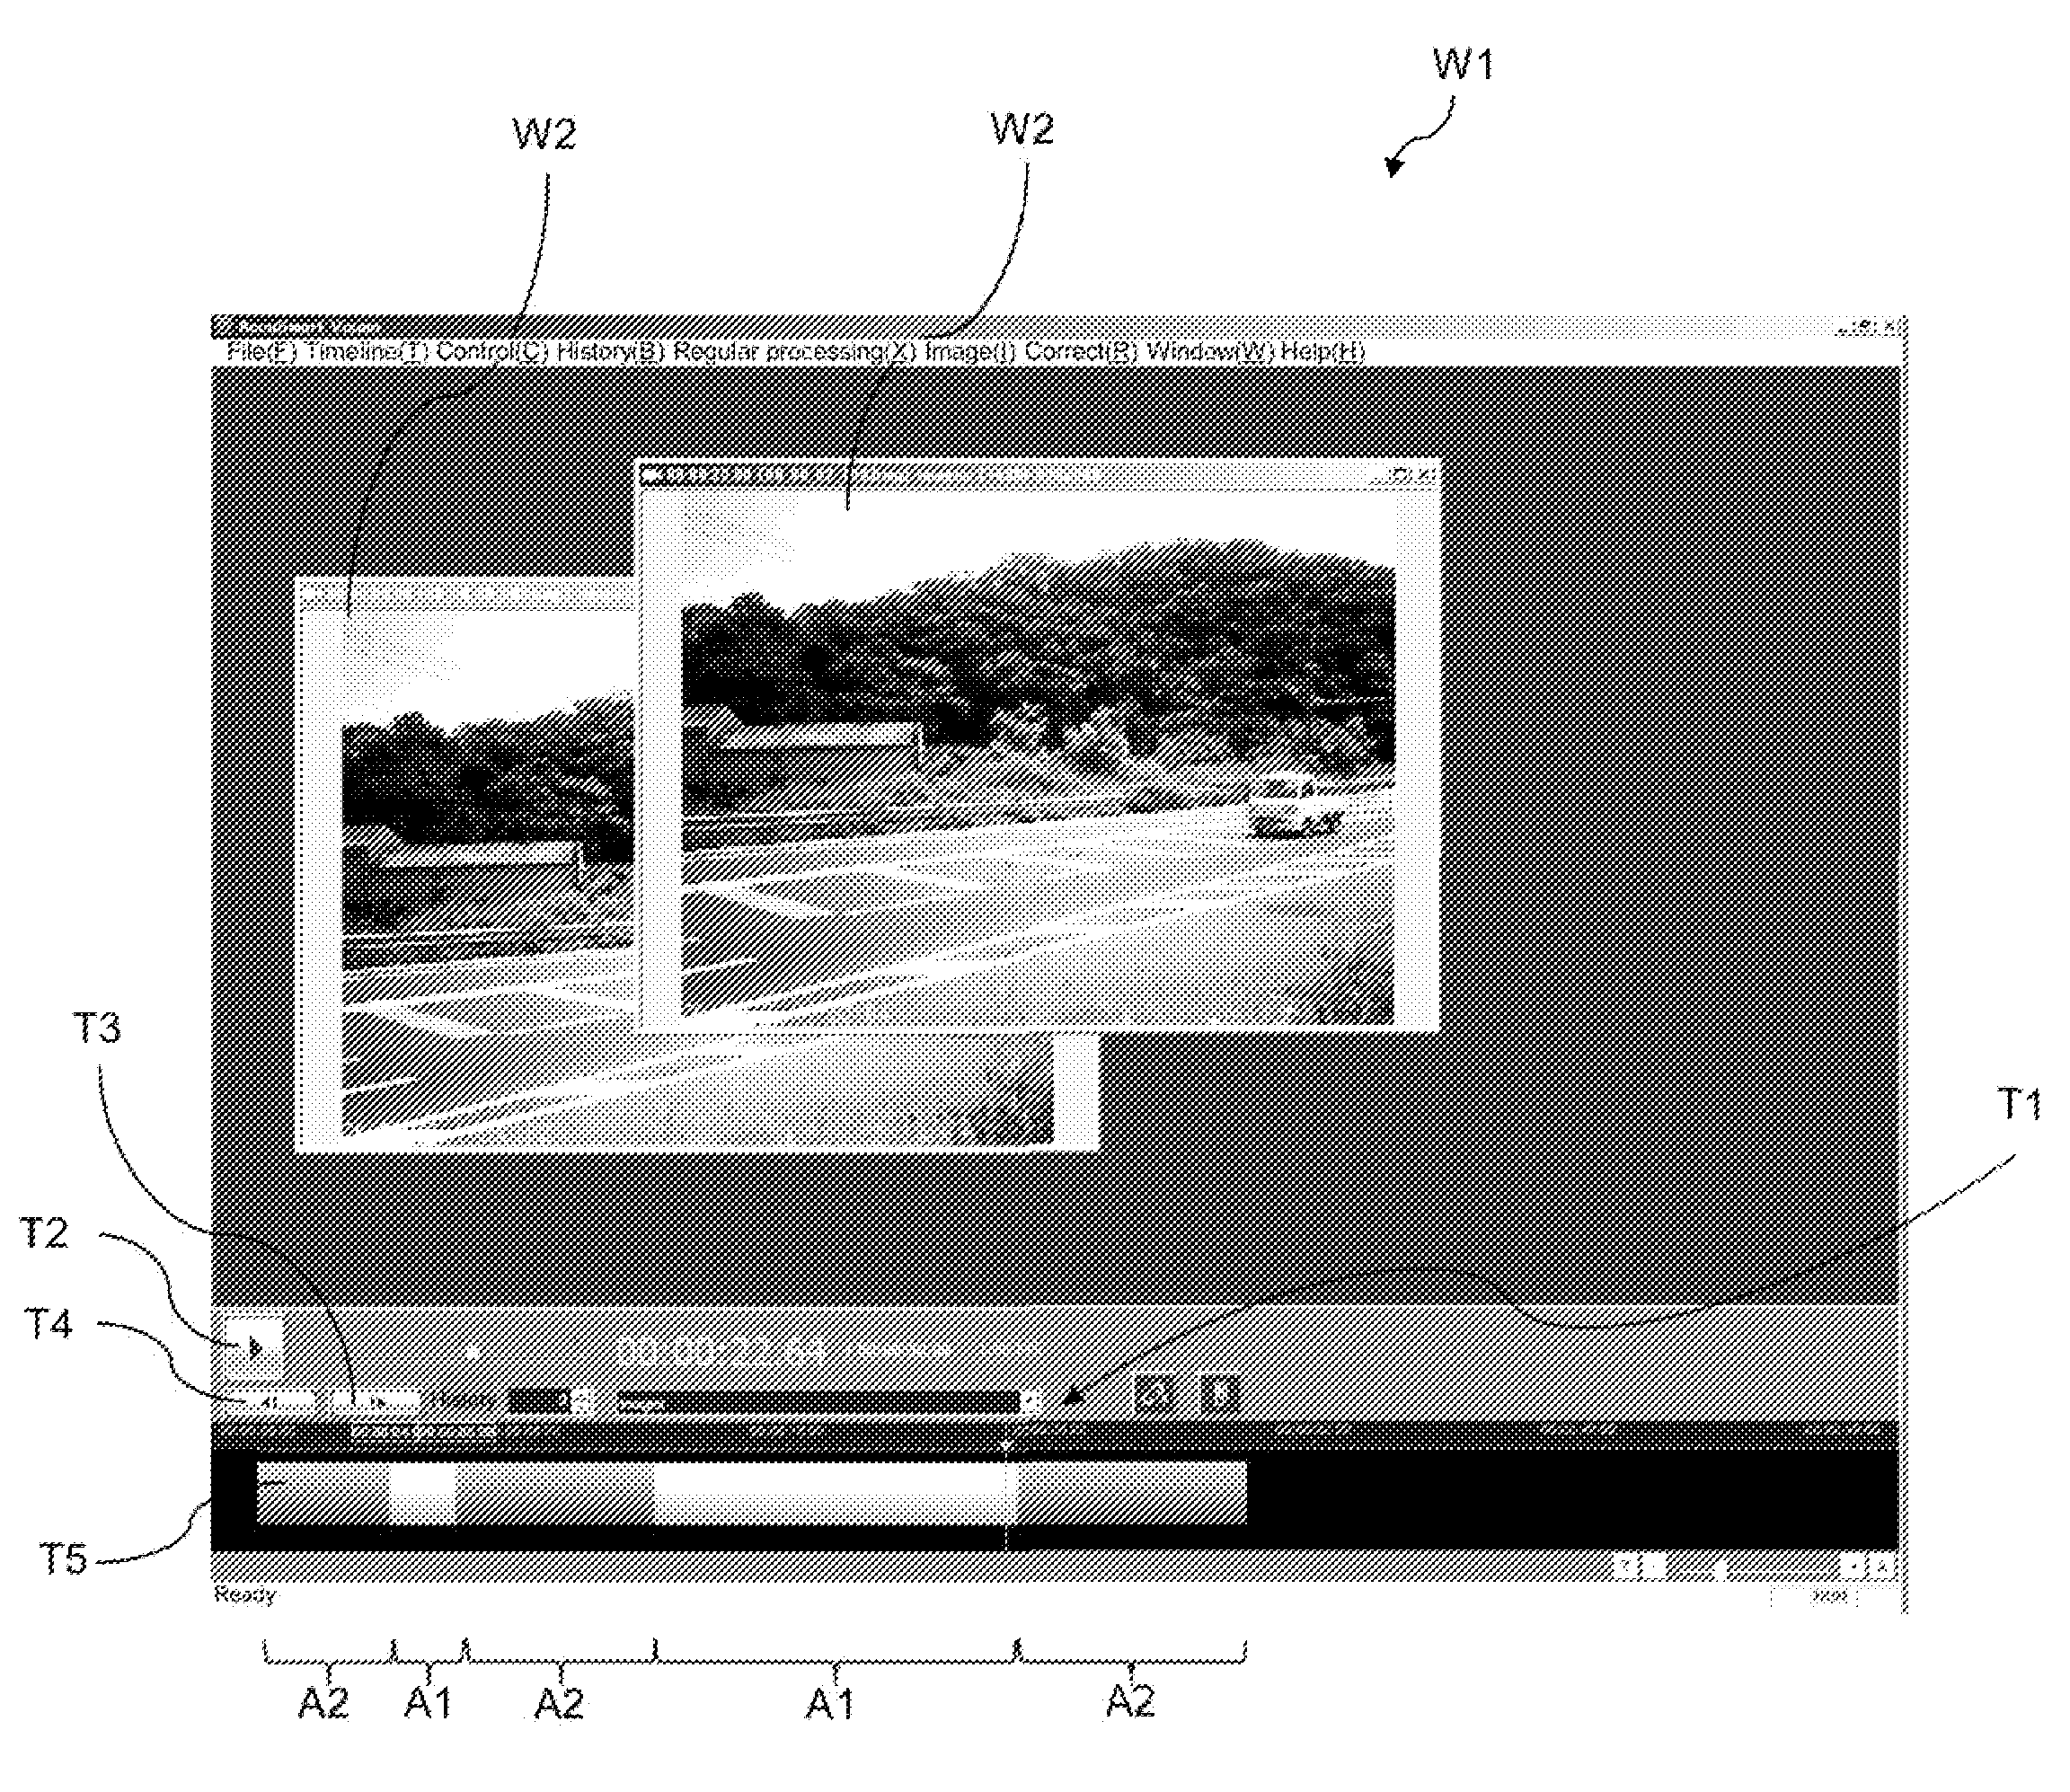 Image processing apparatus, computer-readable medium storing an image processing program, and image processing method